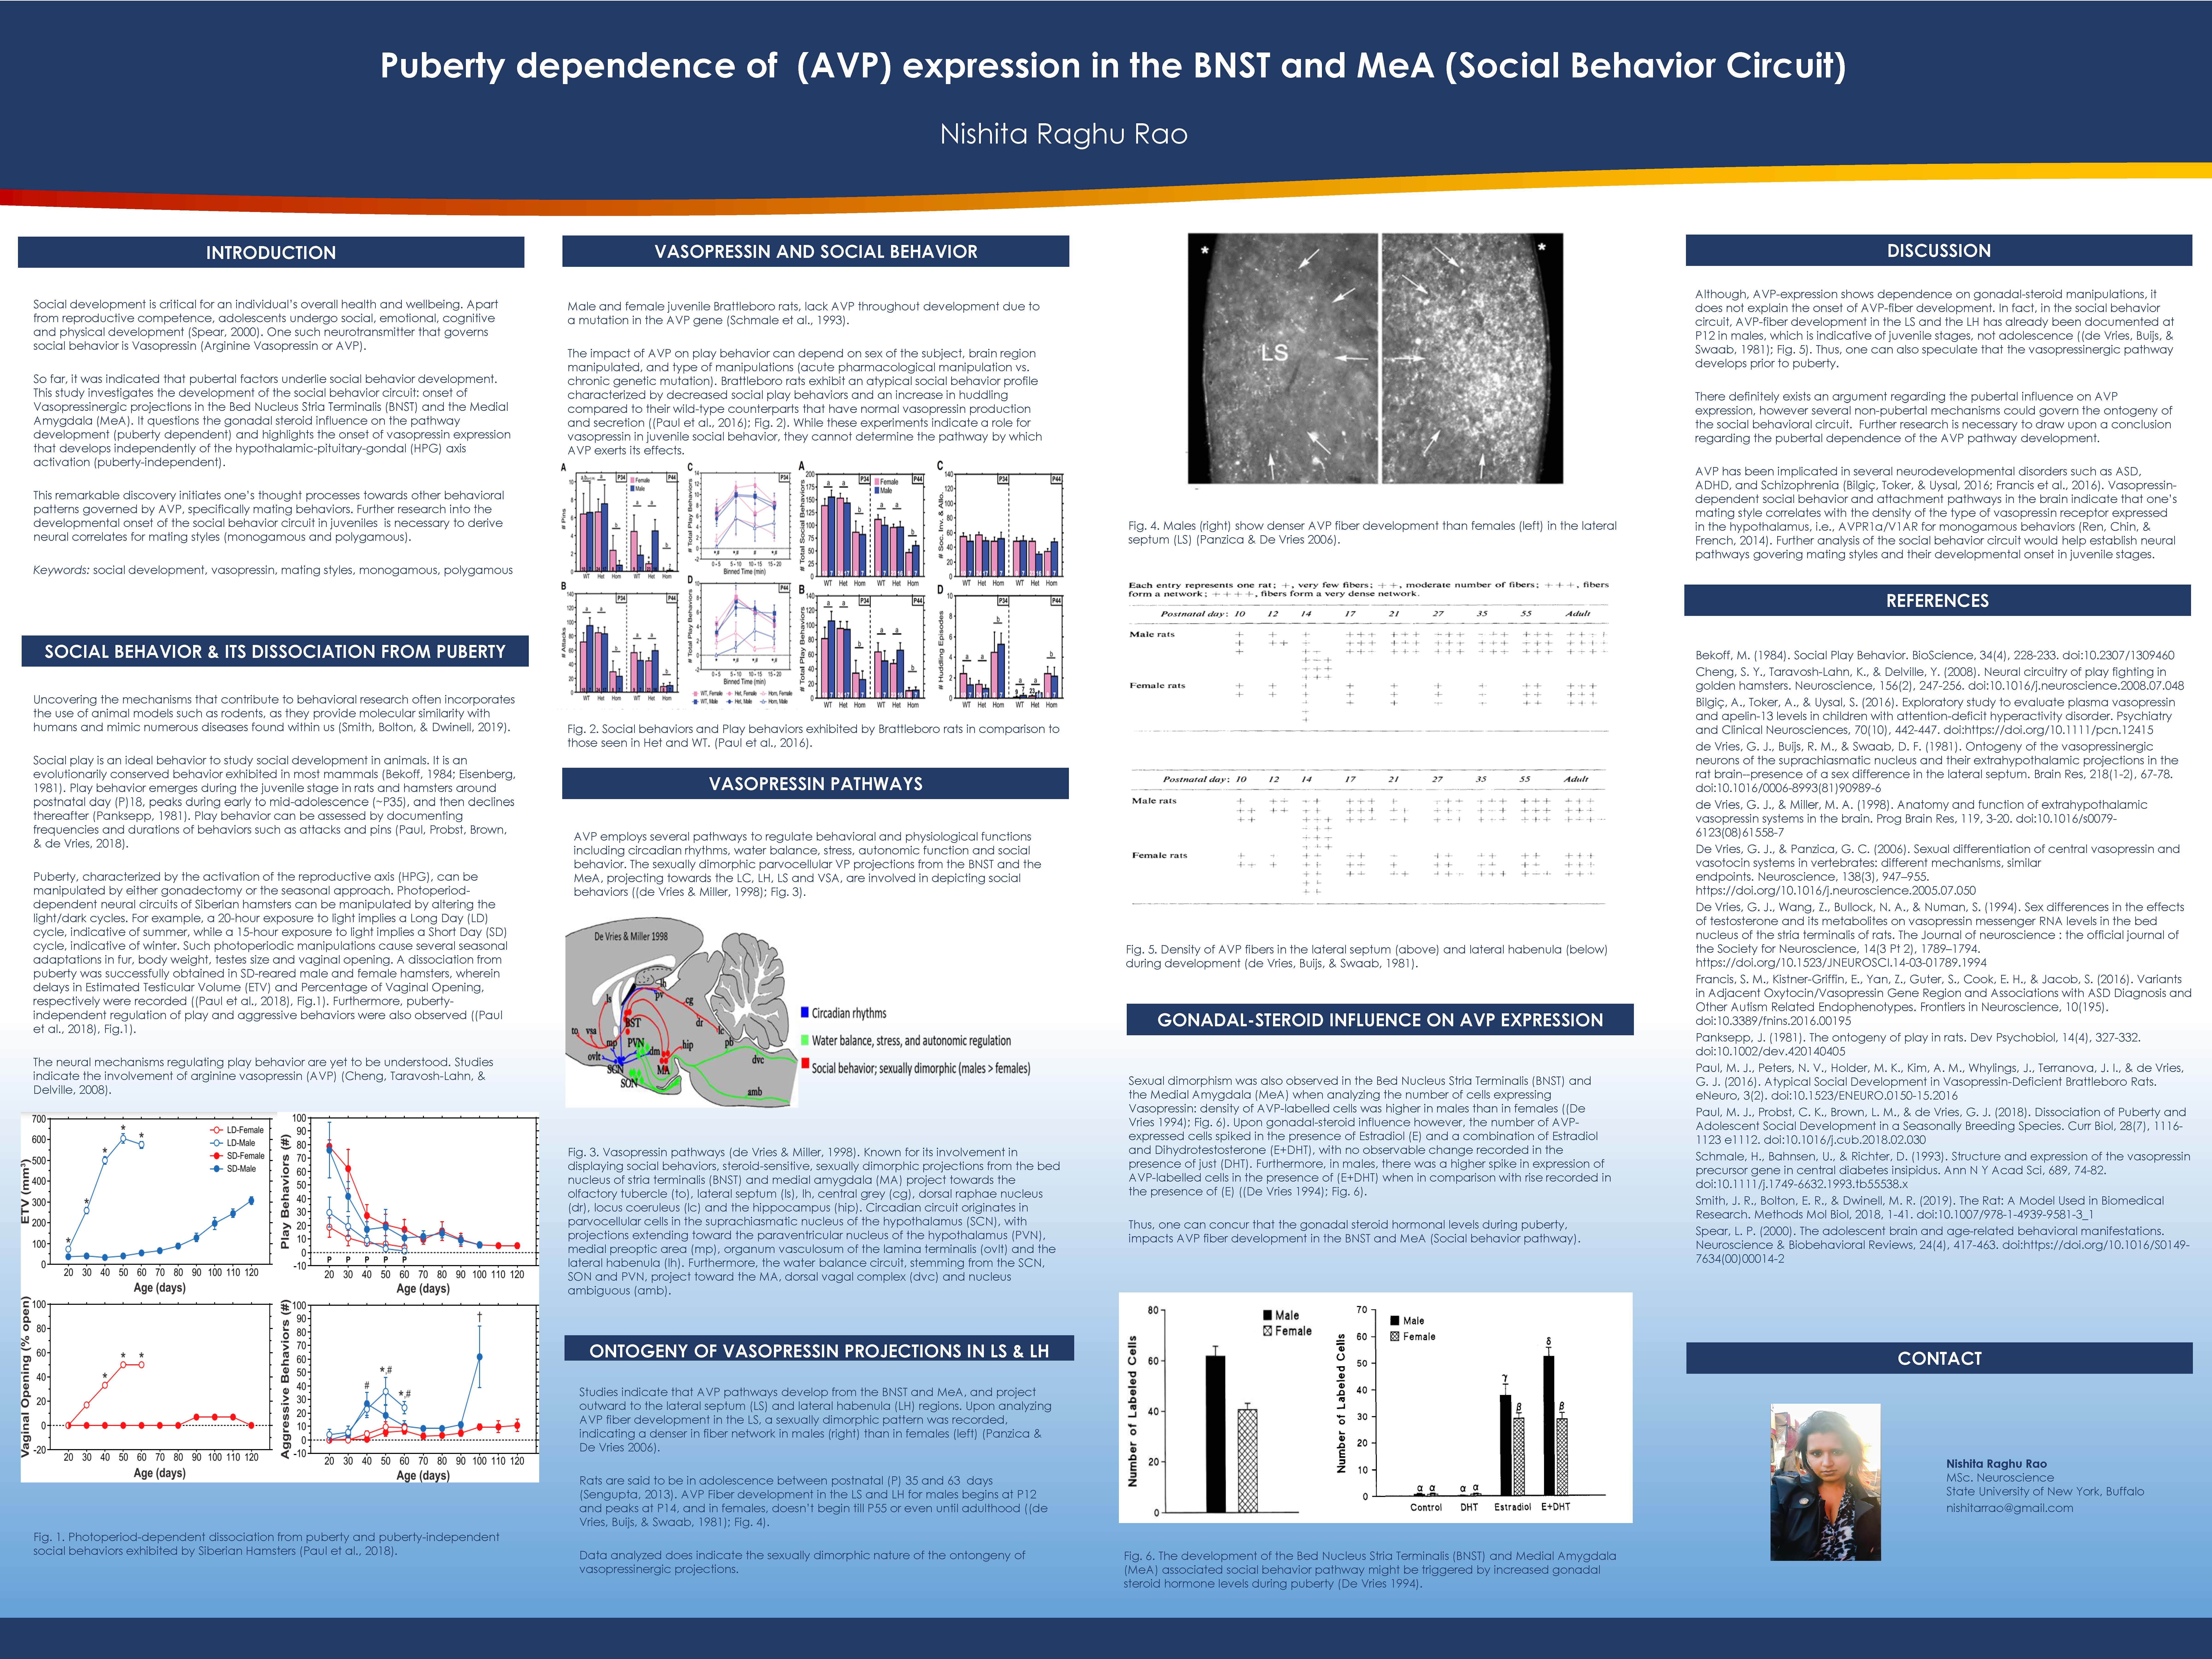 poster - Puberty dependence of (AVP) expression in the BNST and MeA (Social Behavior Circuit)